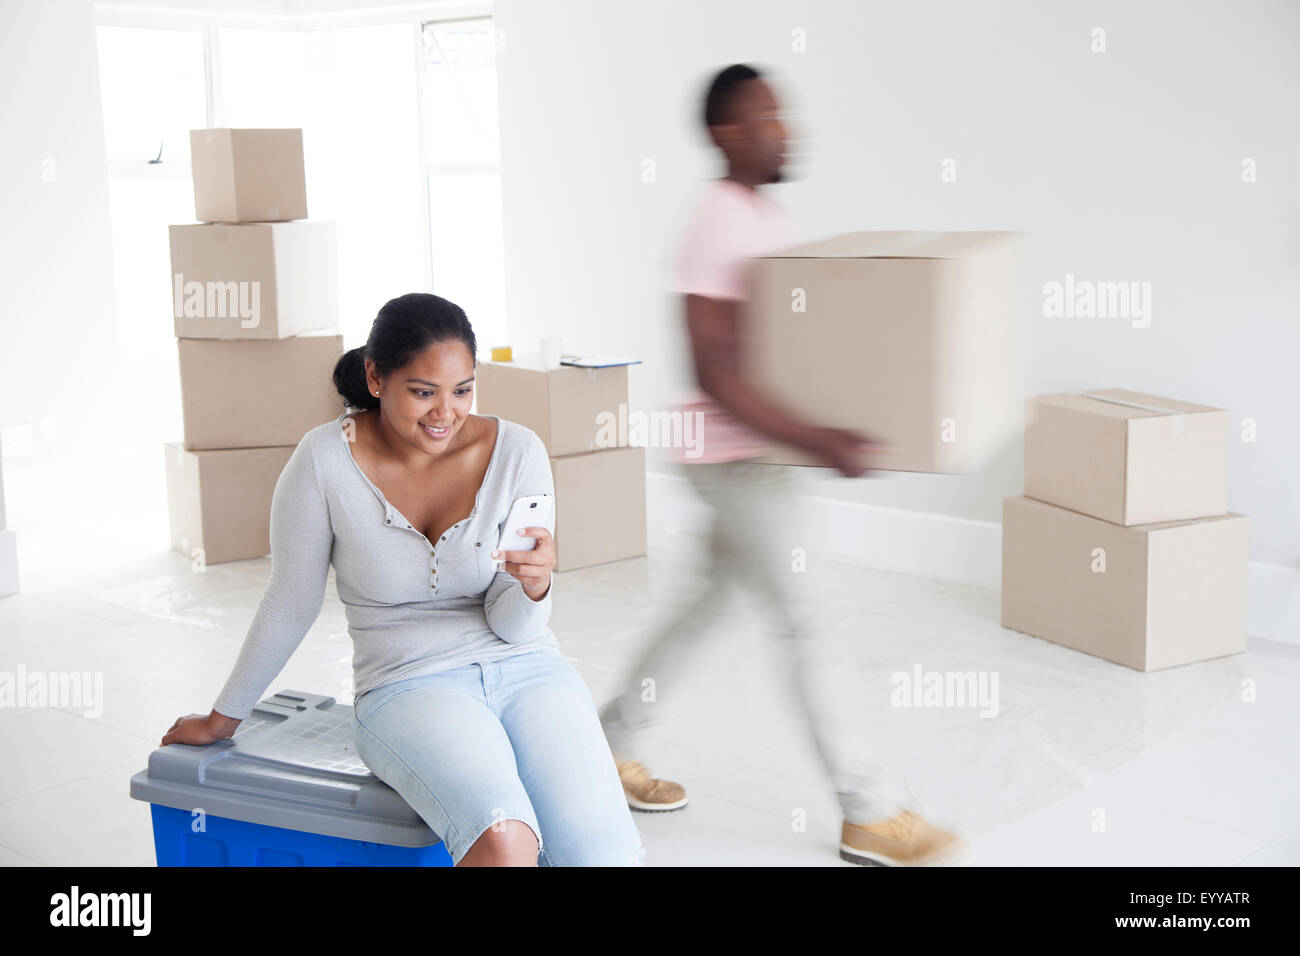 Woman relaxing with man carrying boxes in new home Stock Photo